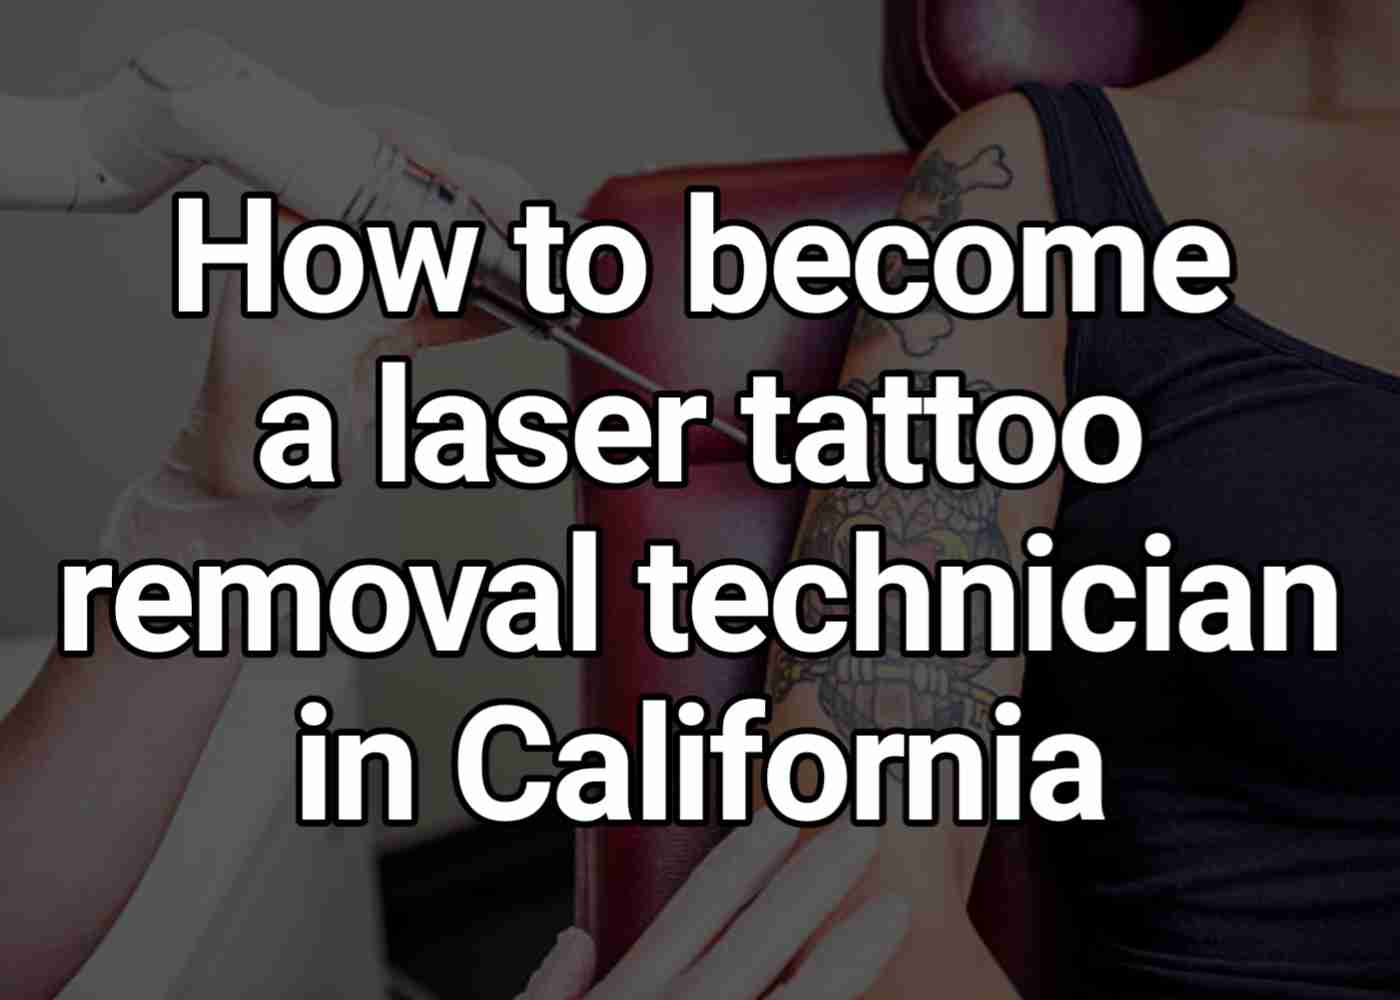 How to become a laser tattoo removal technician in California - Tattoo Bigot